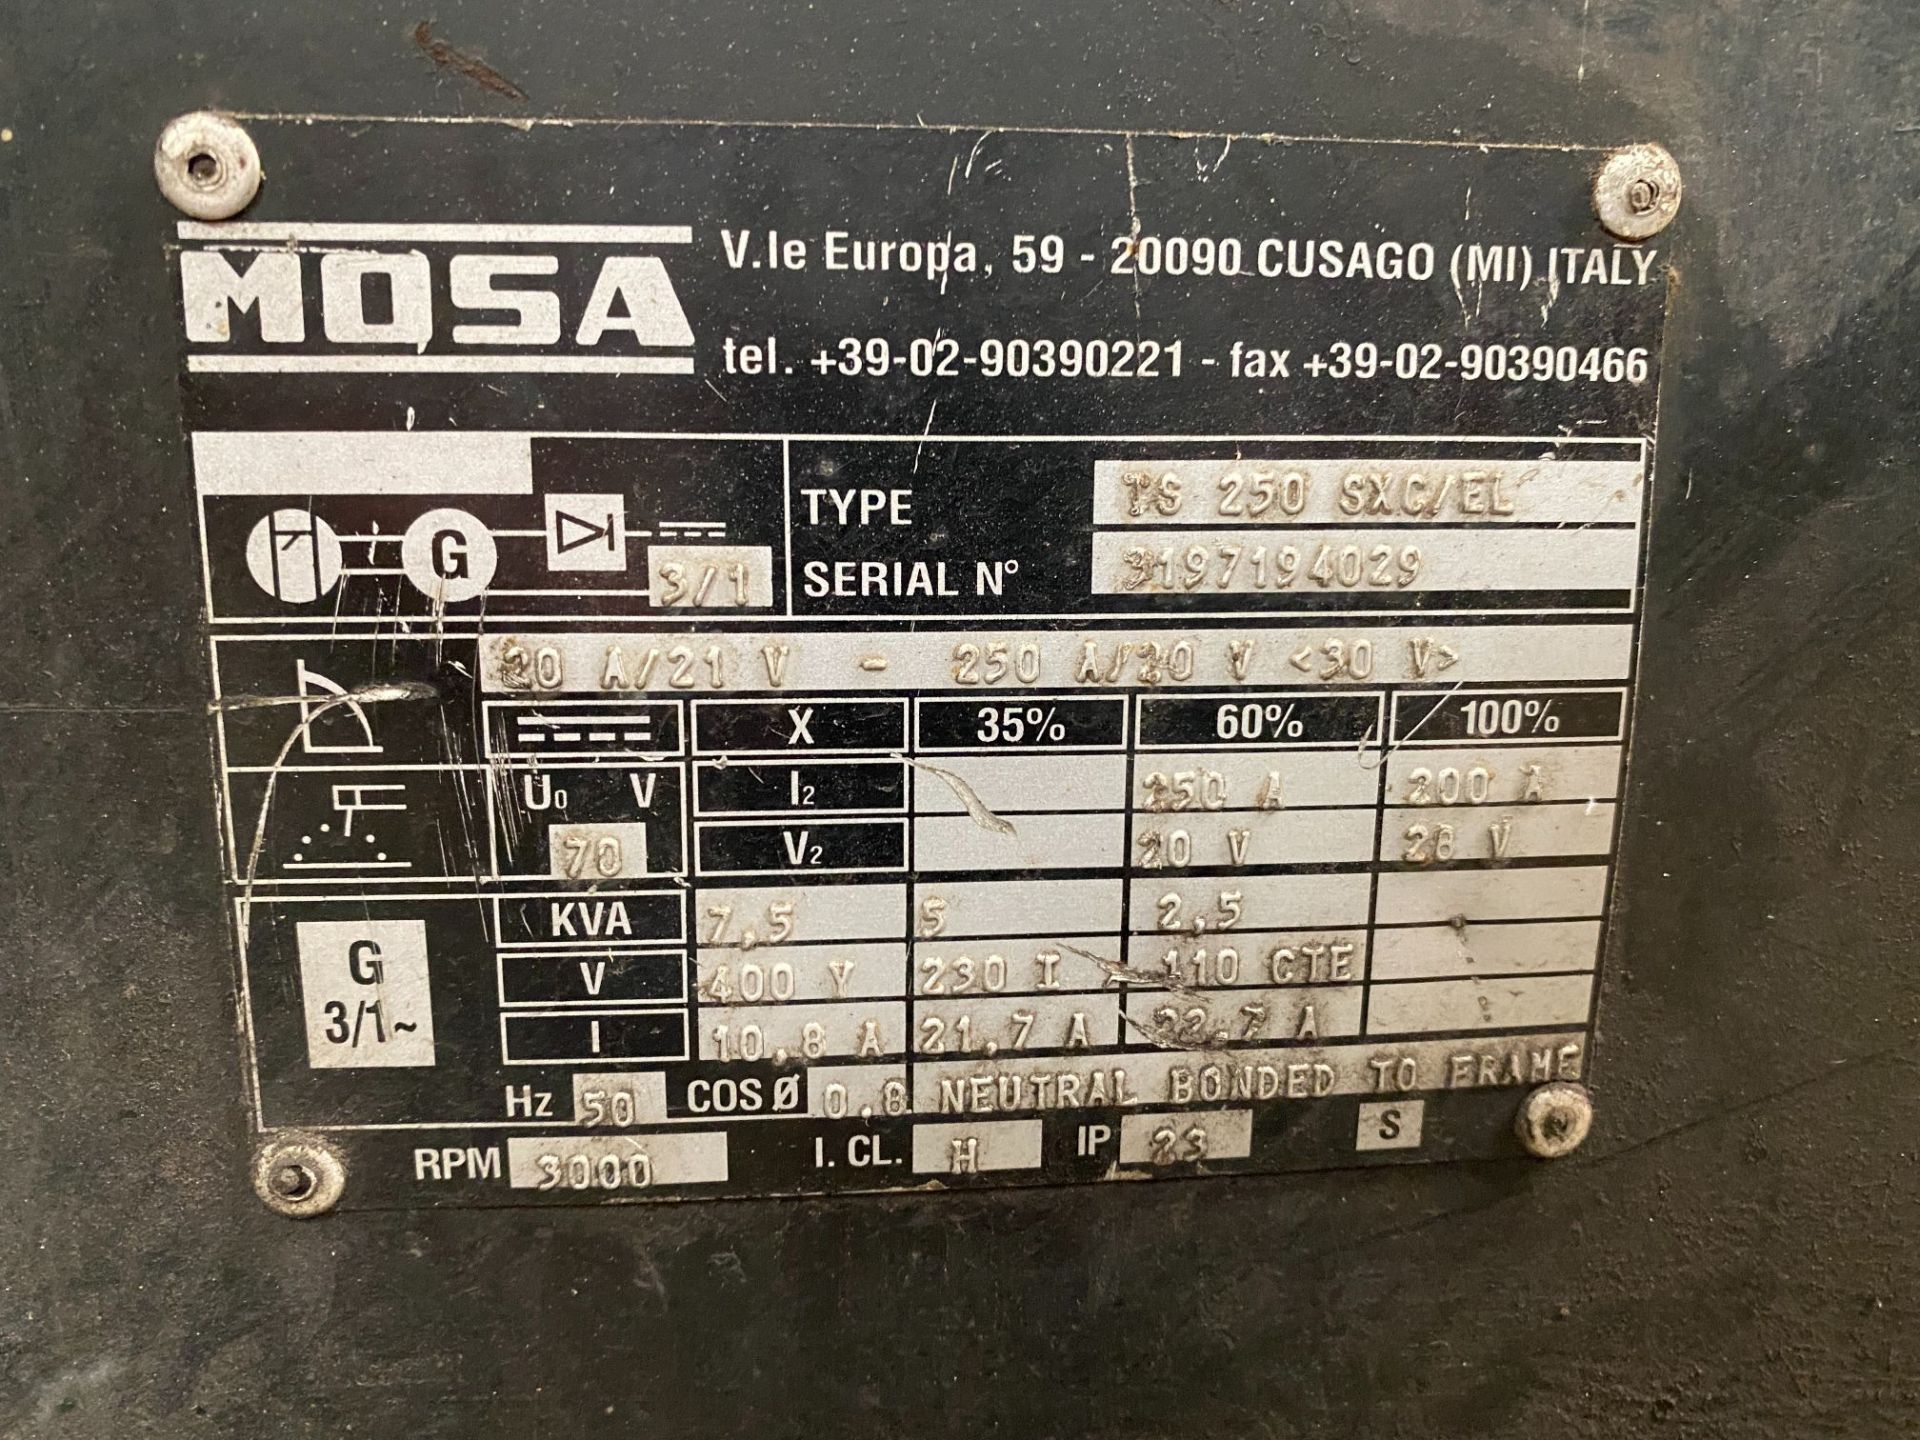 Mosa TS250 SXC Compact diesel engine generator, Serial No: N/A - Image 3 of 4